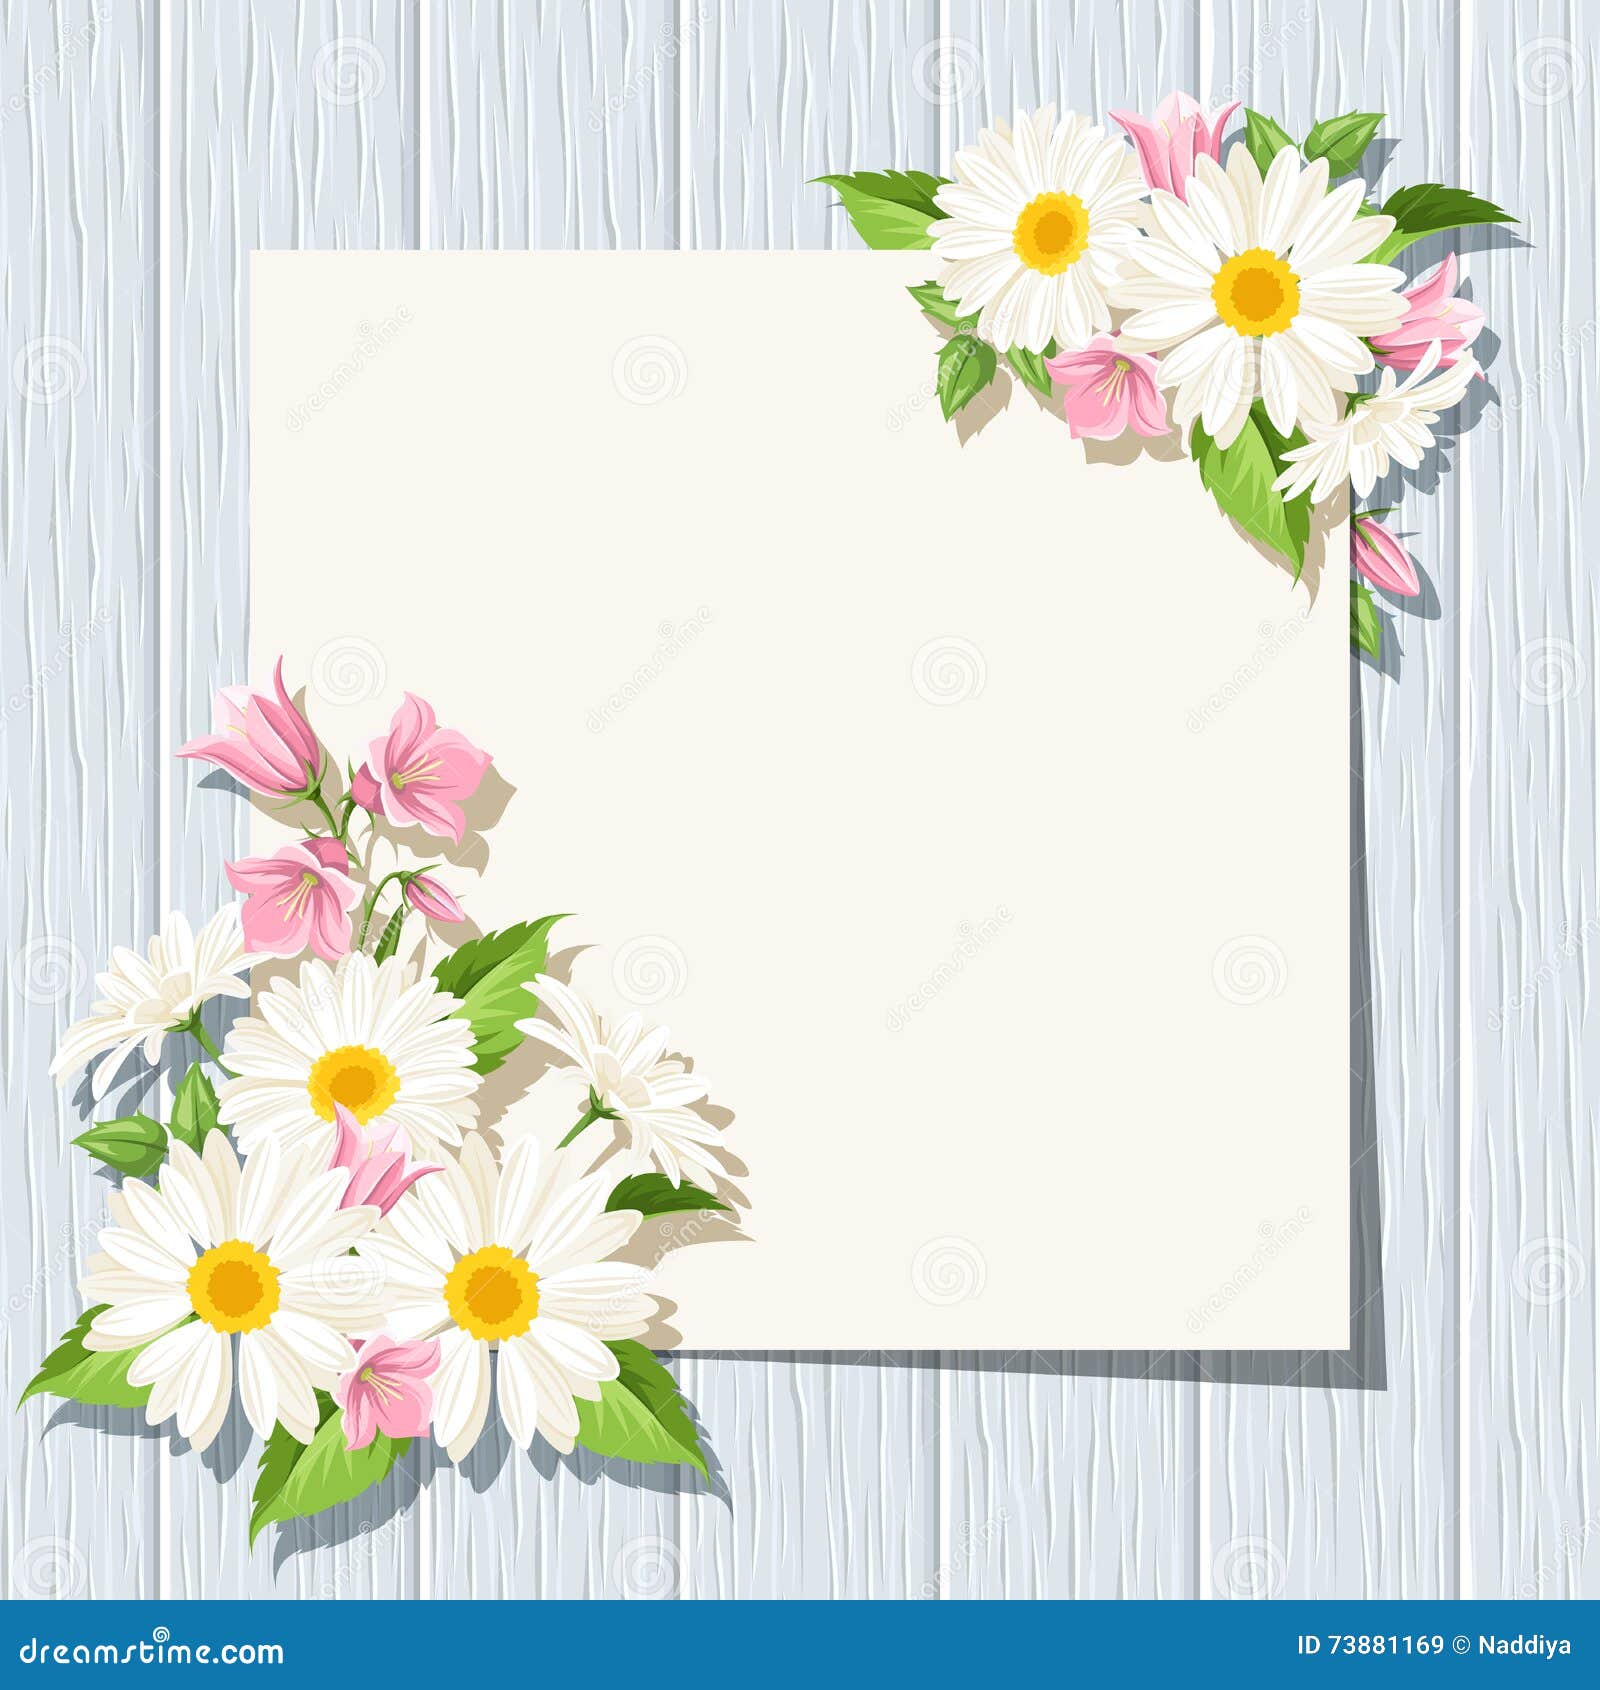 card with daisies and bluebells flowers on a blue wooden background.  eps-10.